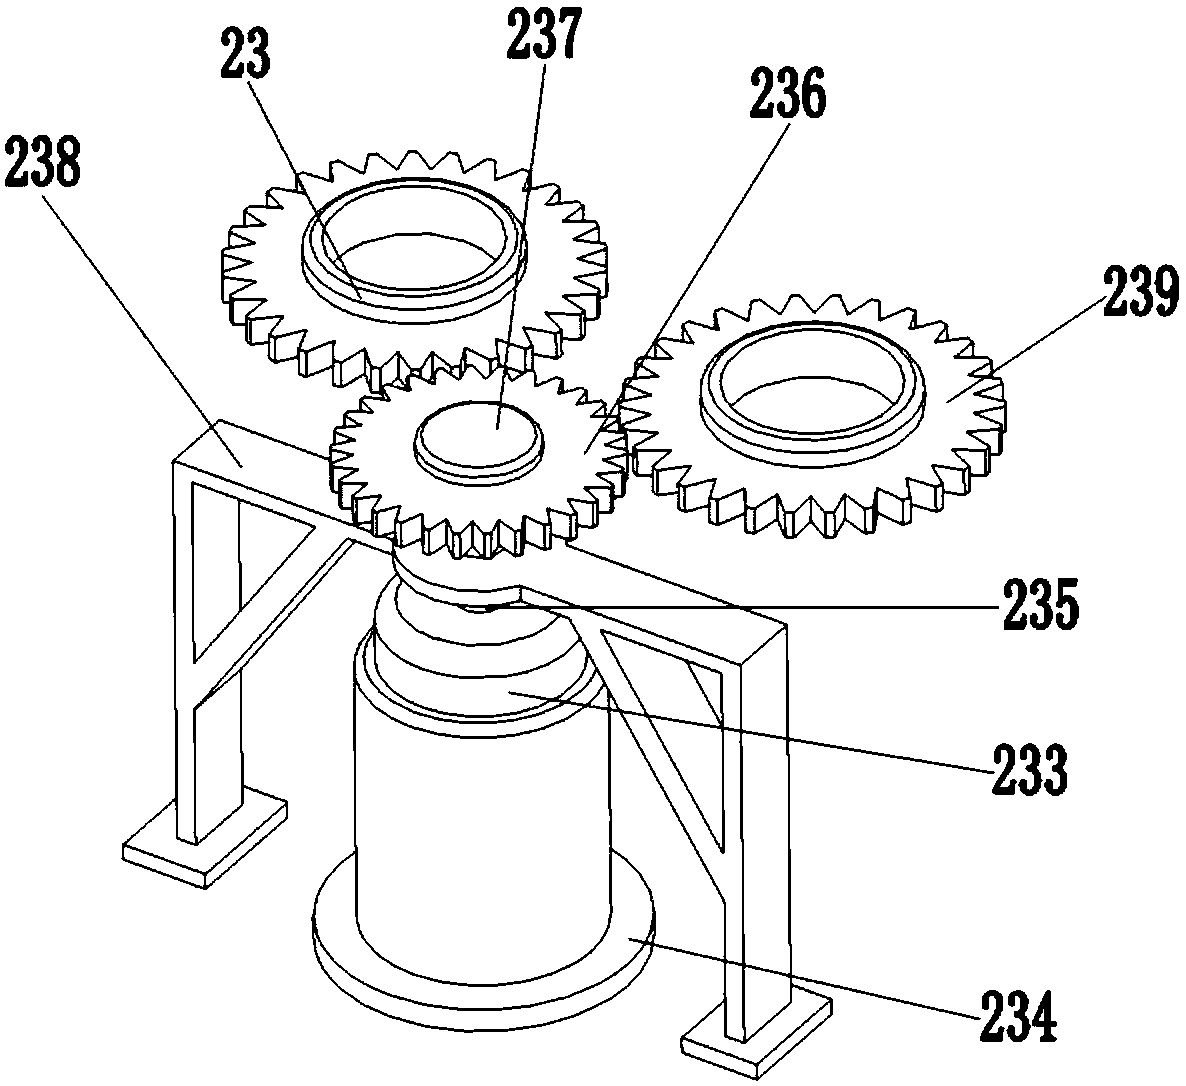 Method for automatically inserting insulation paper into motor stator insulated slot